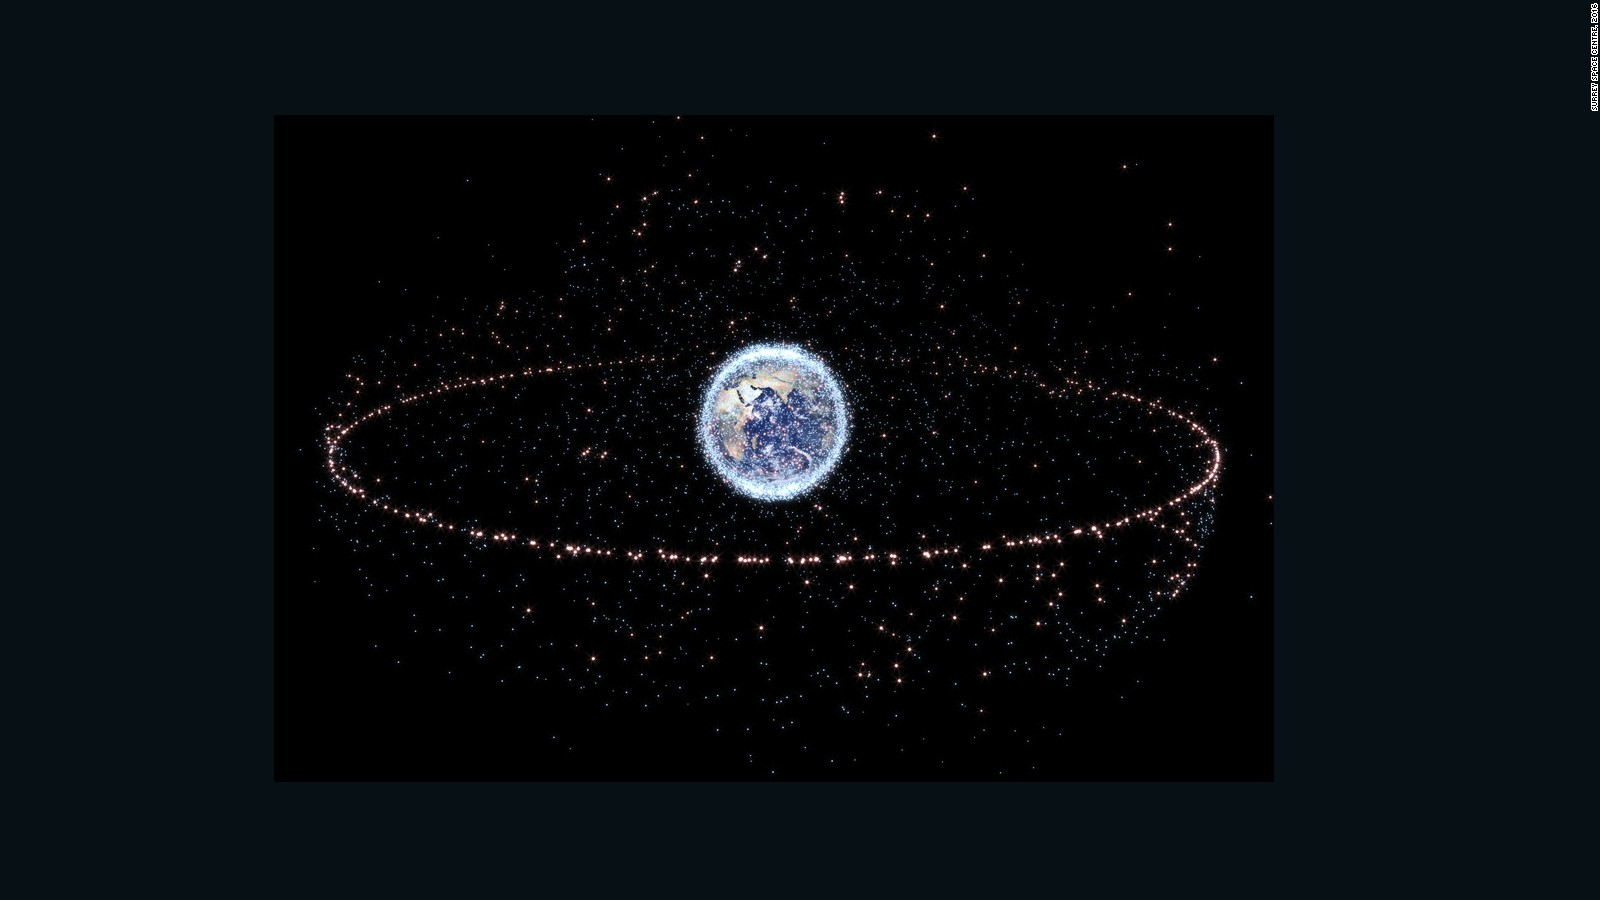   This mission seeks to clear space debris from our orbit  Video

